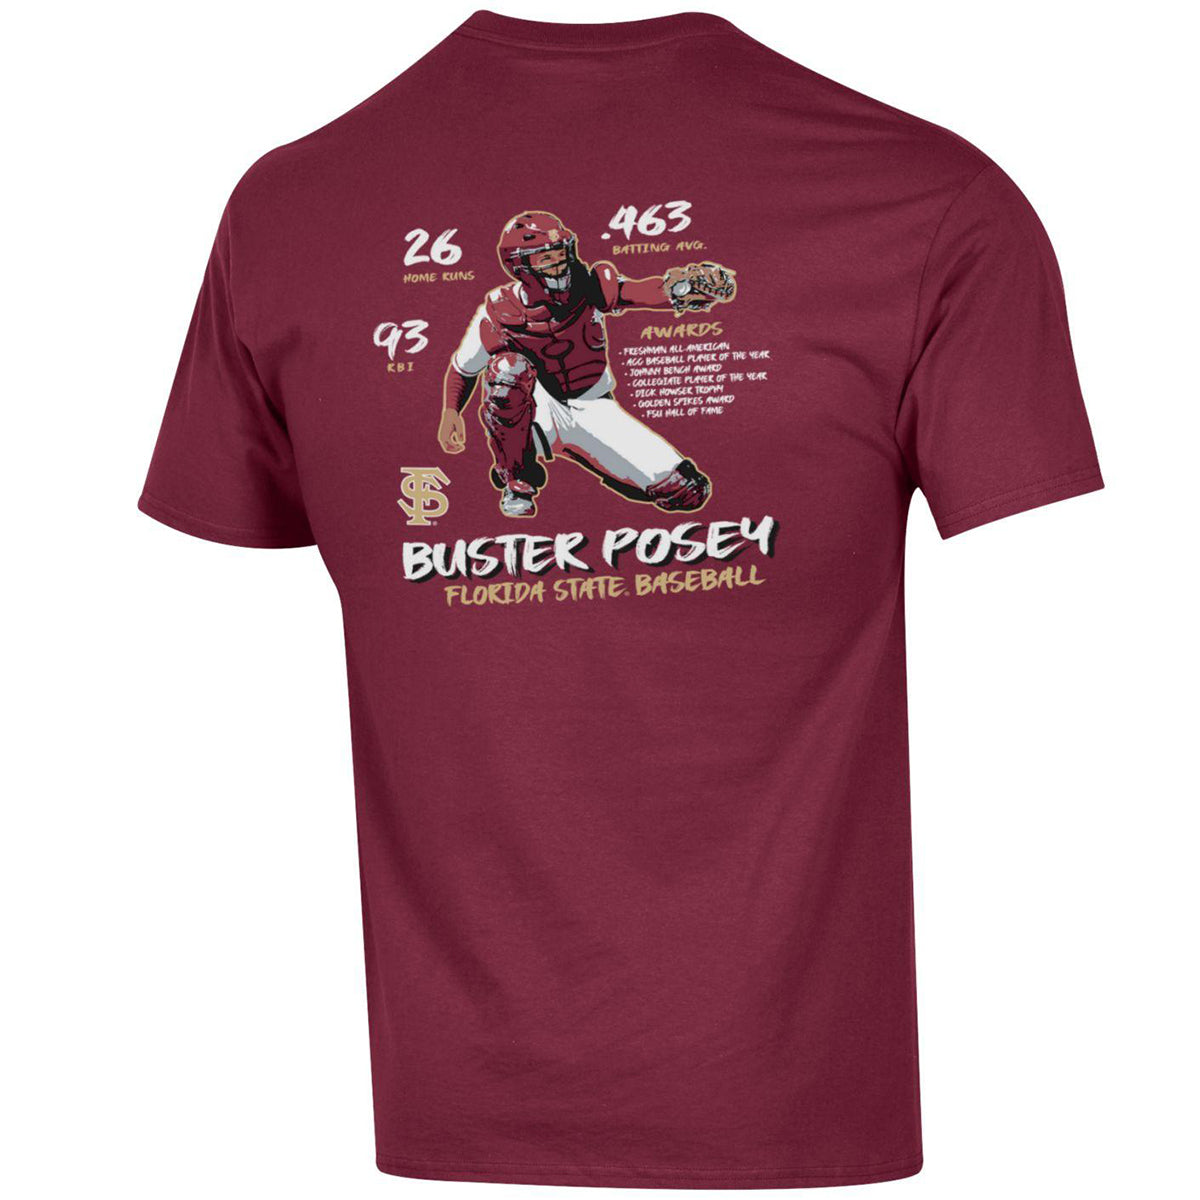 Champion Adult/Unisex Buster Posey Image and Stats Design Short Sleeve –  Garnet & Gold